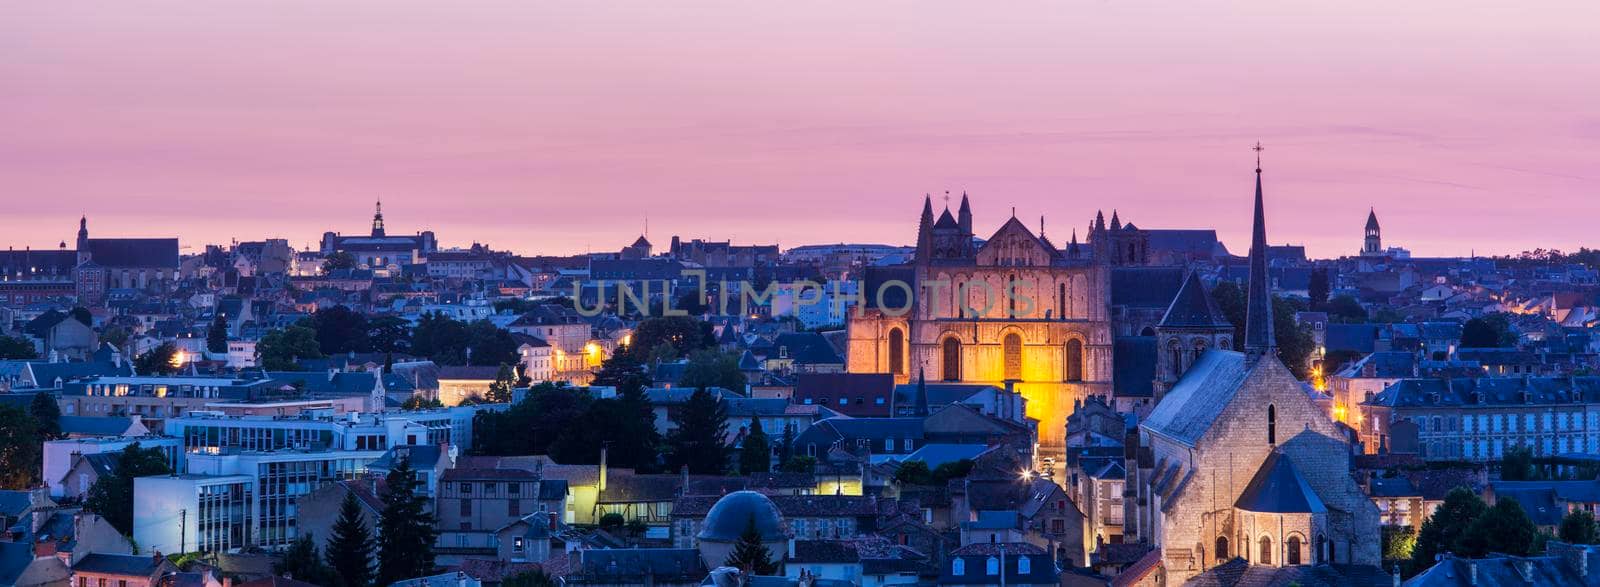 Panorama of Poitiers with Cathedral of Saint Peter  by benkrut